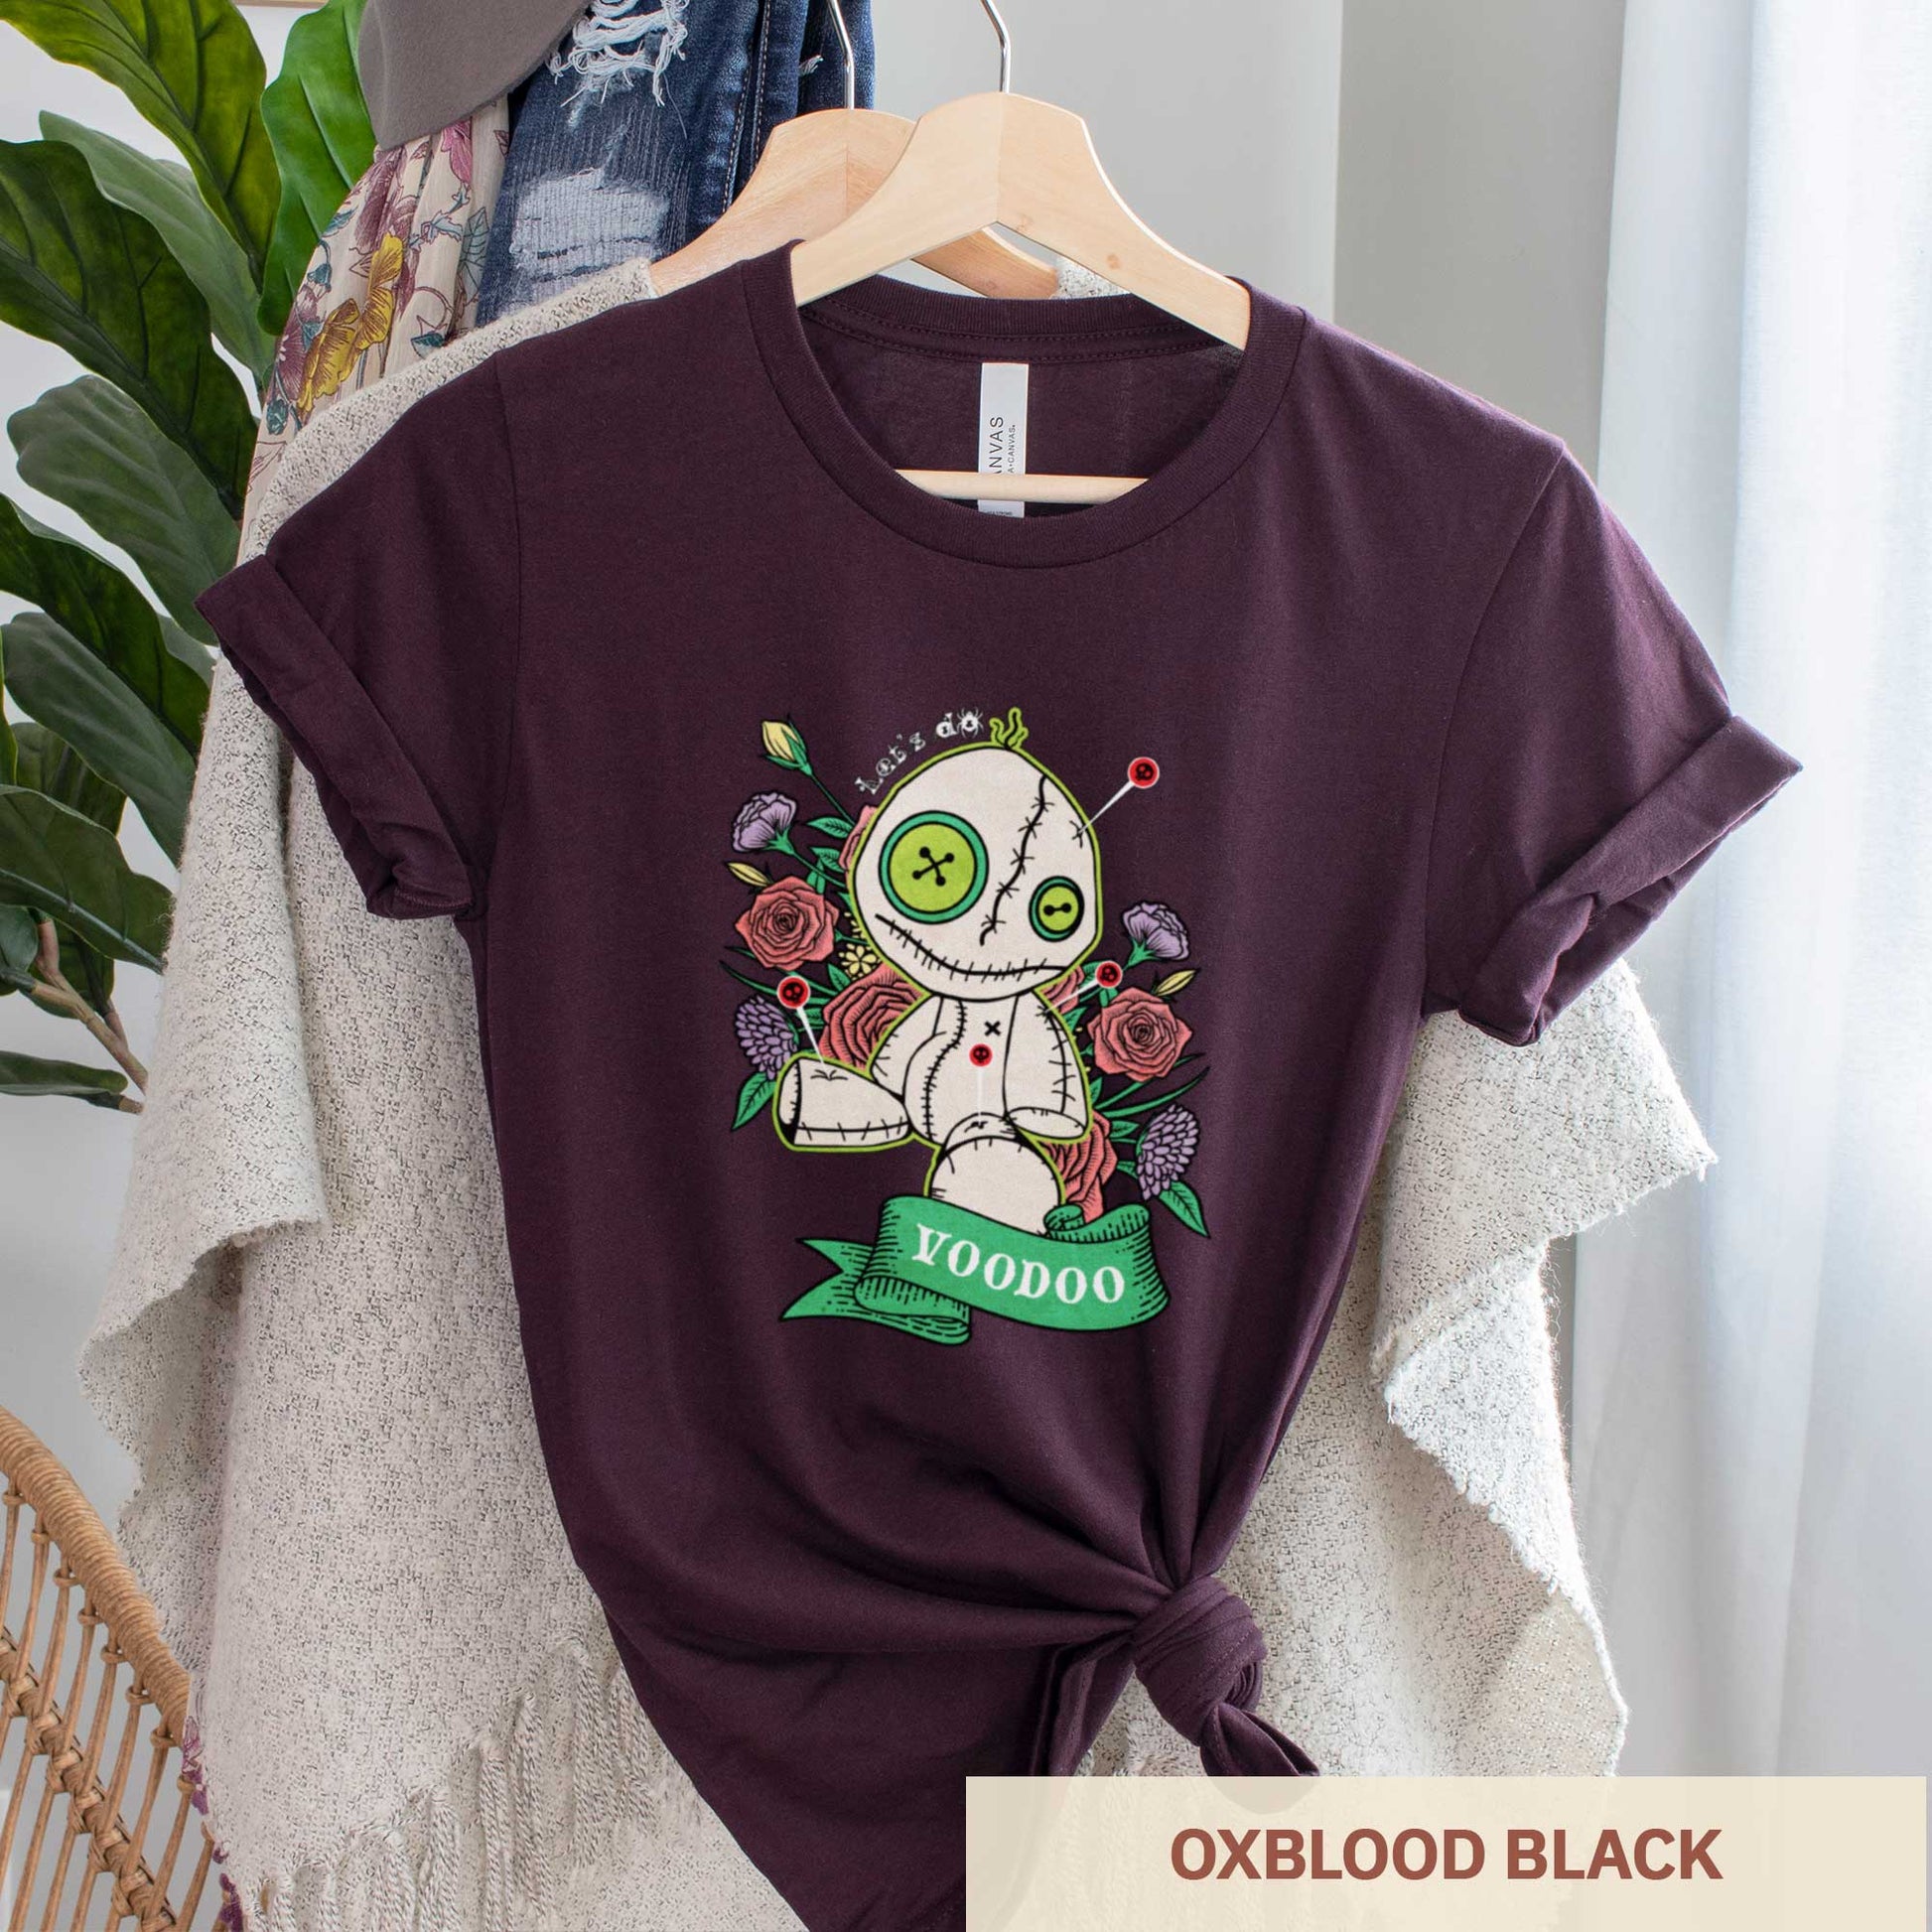 An oxblood black heather Bella Canvas t-shirt featuring a cartoon voodoo doll and flowers.